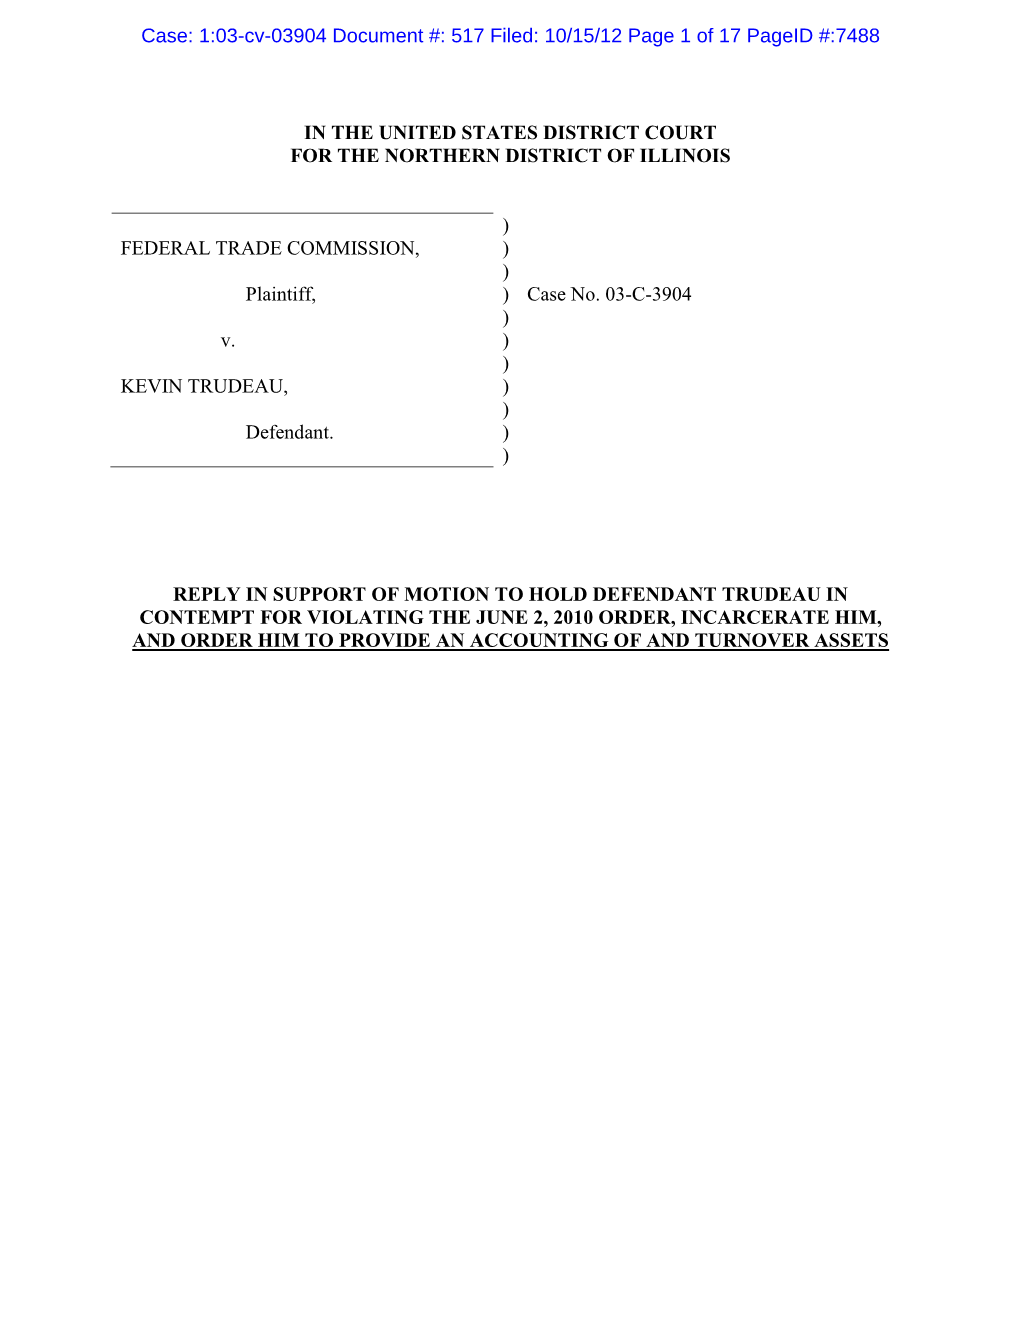 Reply in Support of Motion to Hold Defendant Kevin Trudeau in Contempt for Violating the June 2, 2010 Order, Incarcerate Him, An